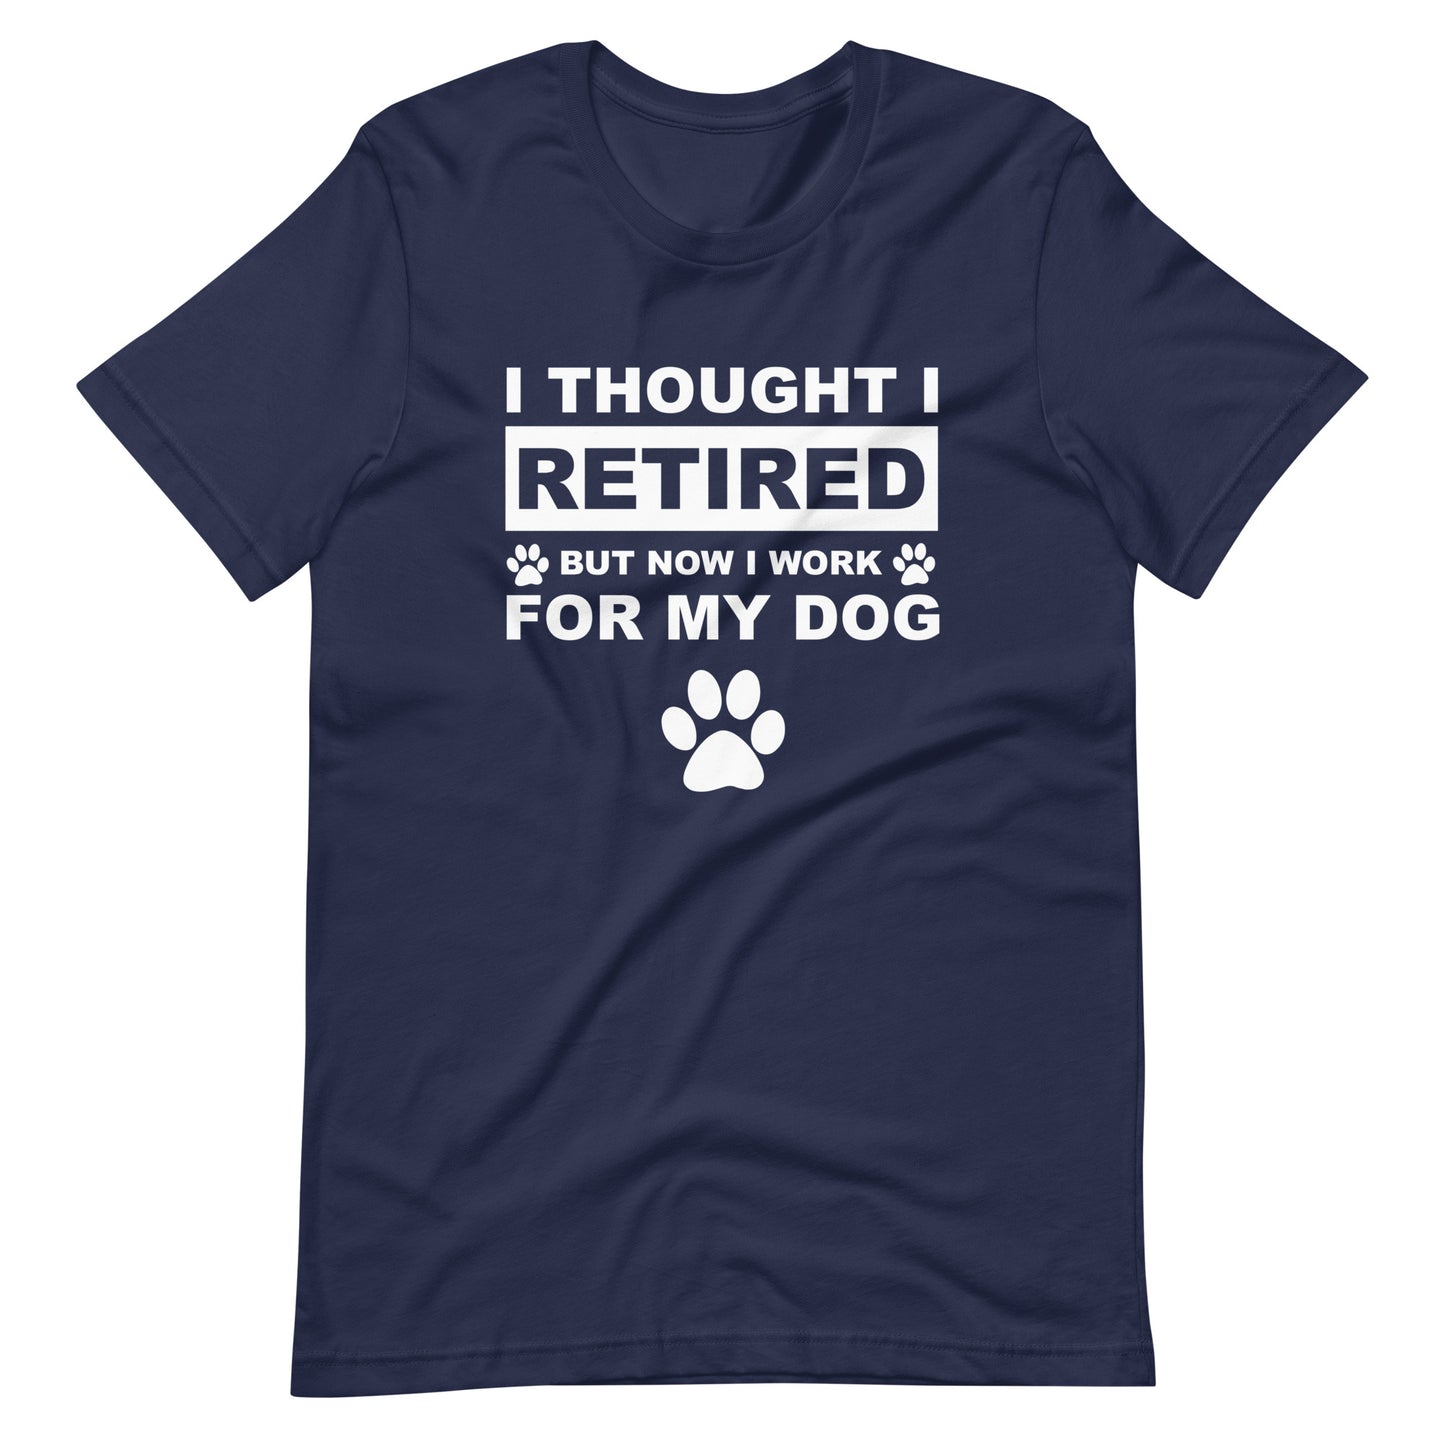 I Thought I Retired But Now I Work for My Dog T-Shirt